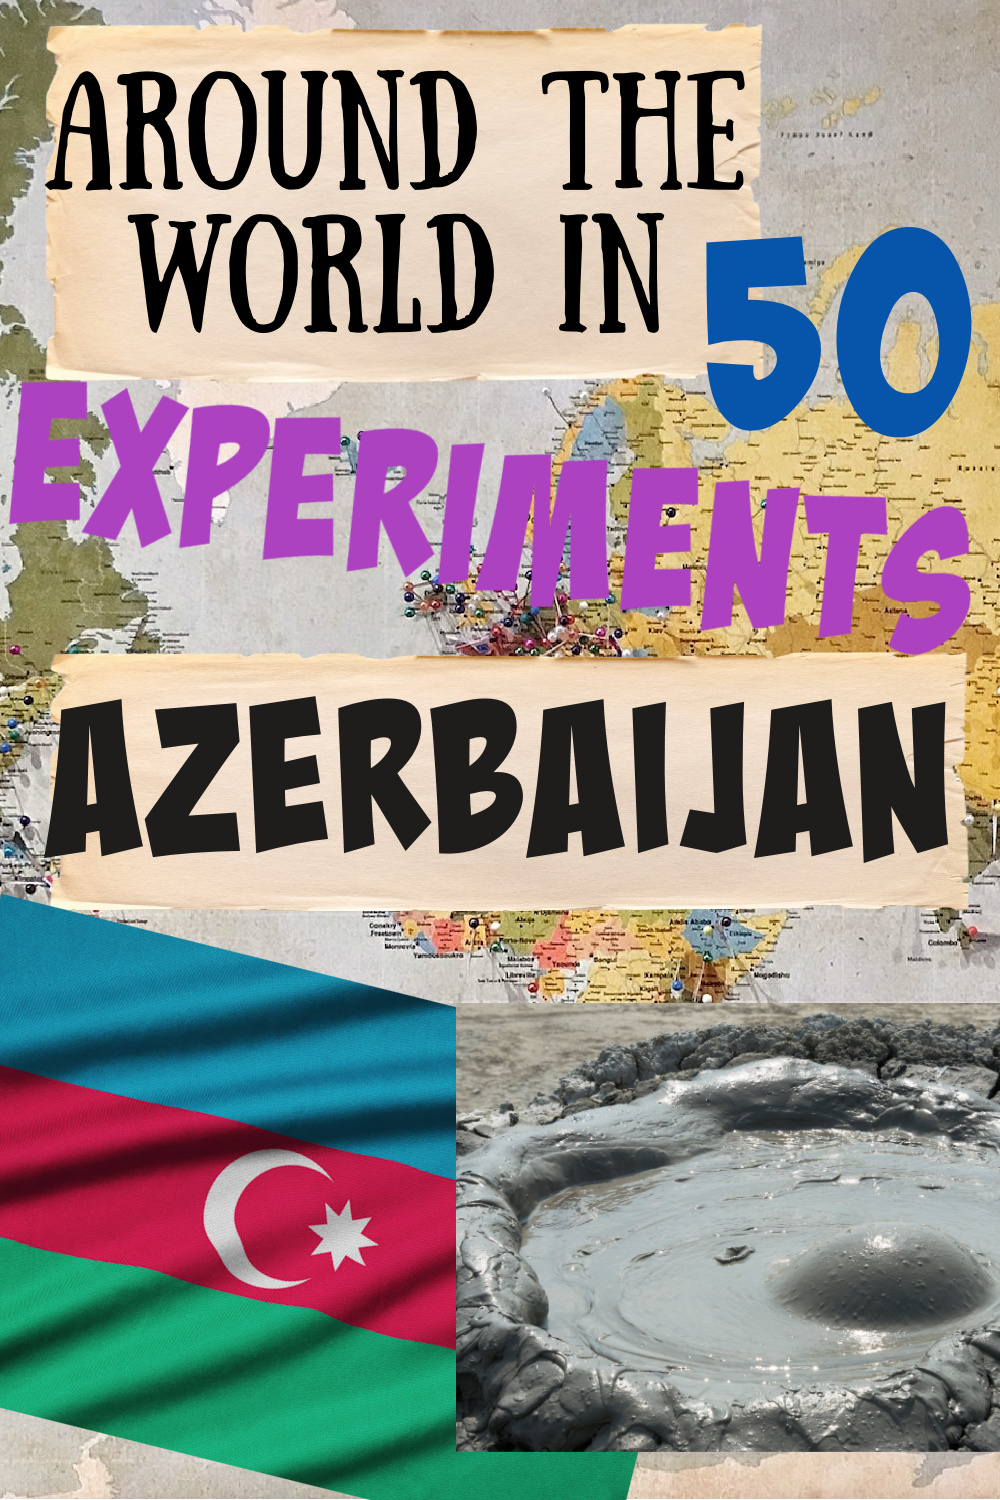 Azerbaijan - Around the World in 50 Experiments. Learn about the mud volcanoes of Azerbaijan